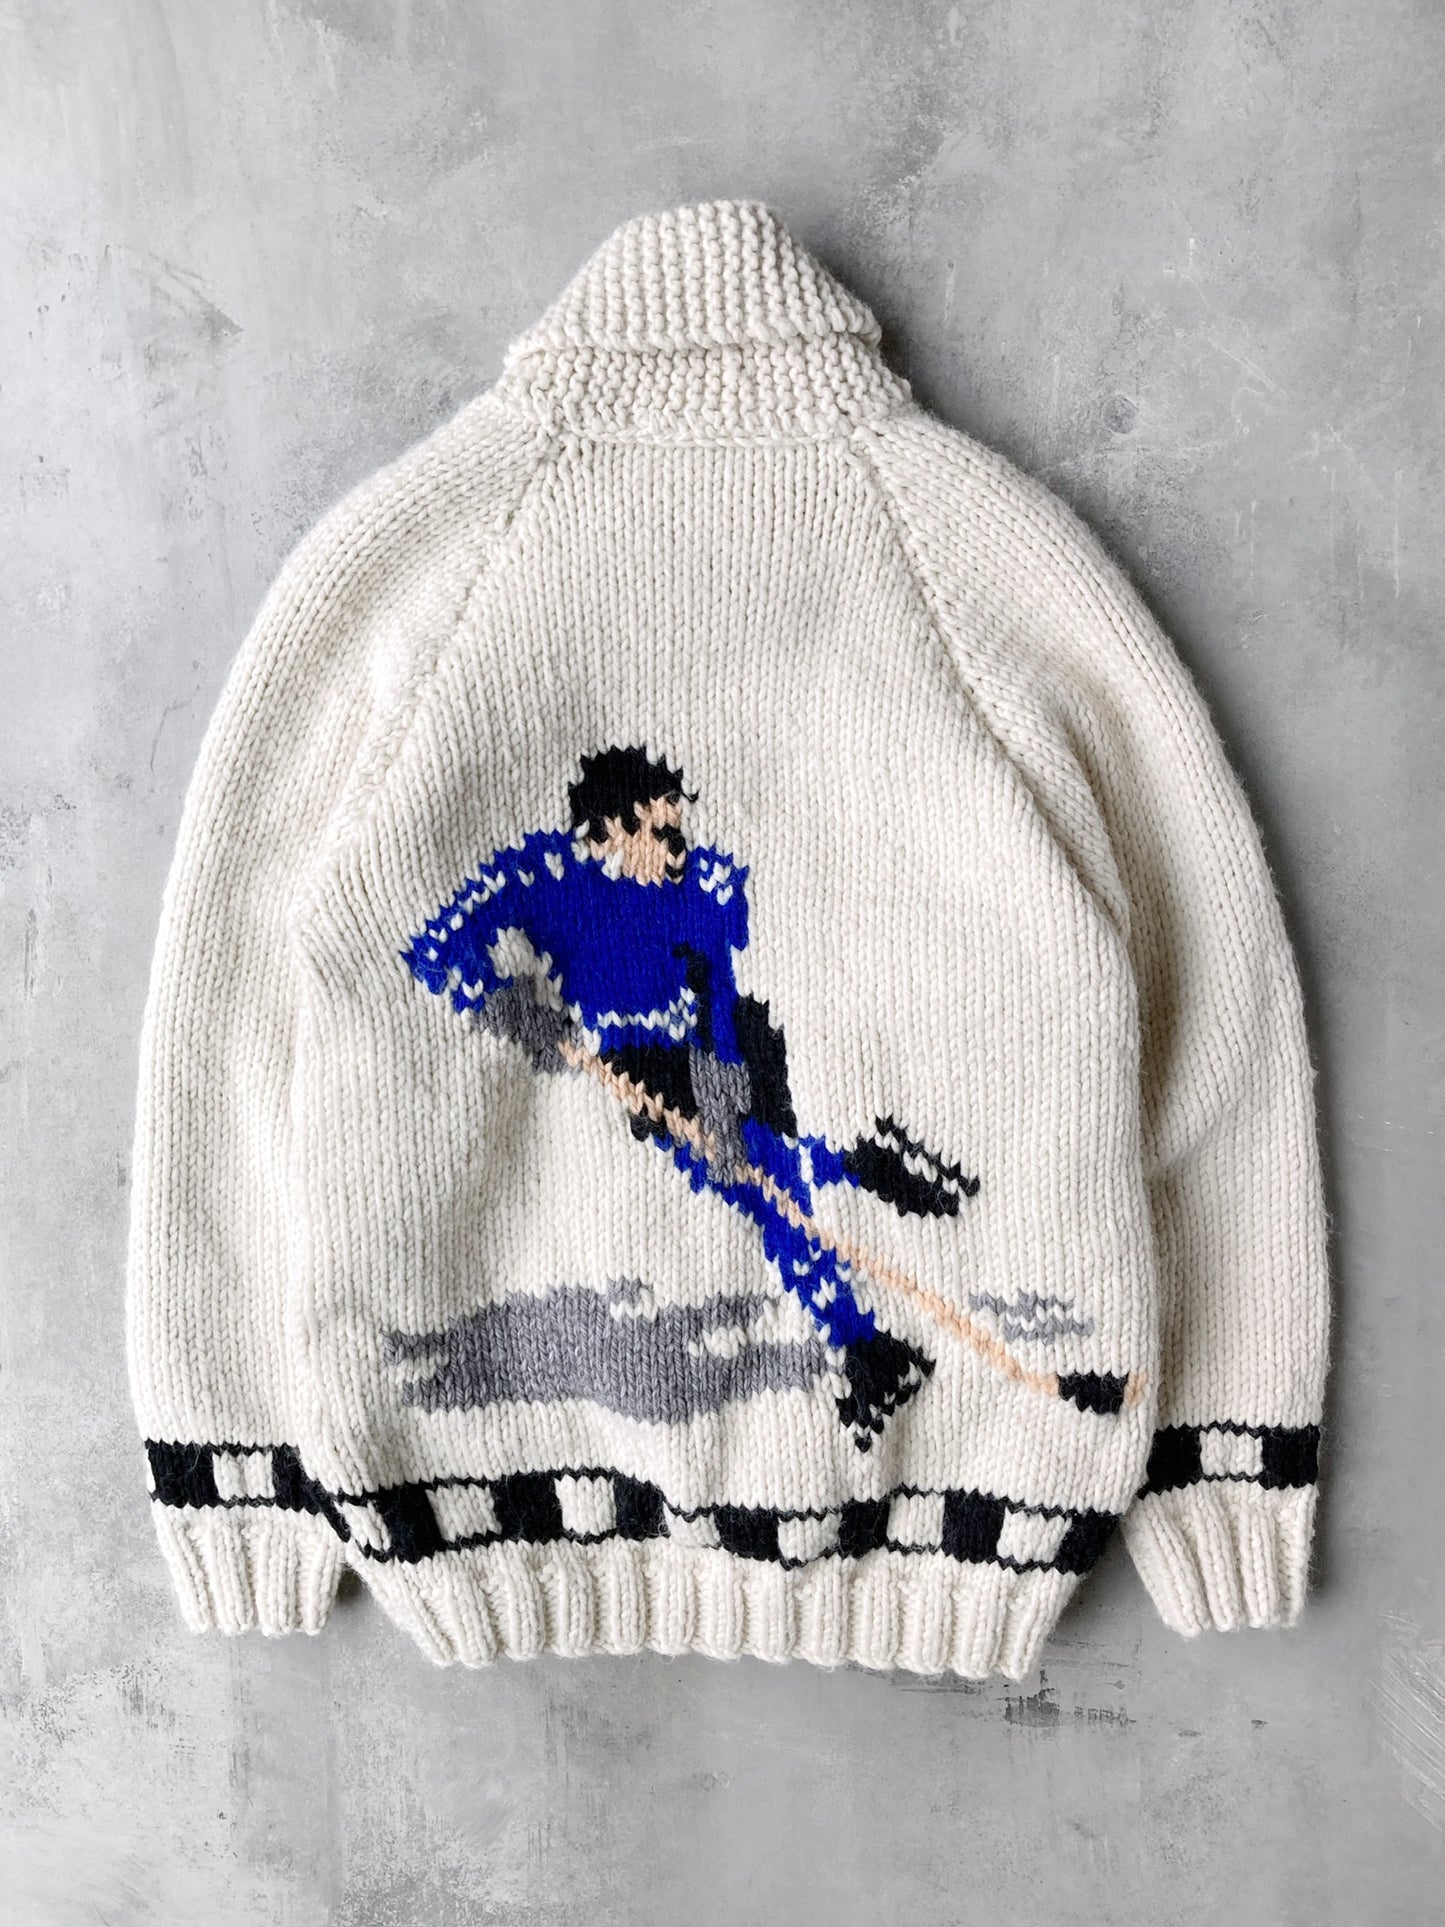 Hockey Player Cowichan Sweater 60's - XS / Small